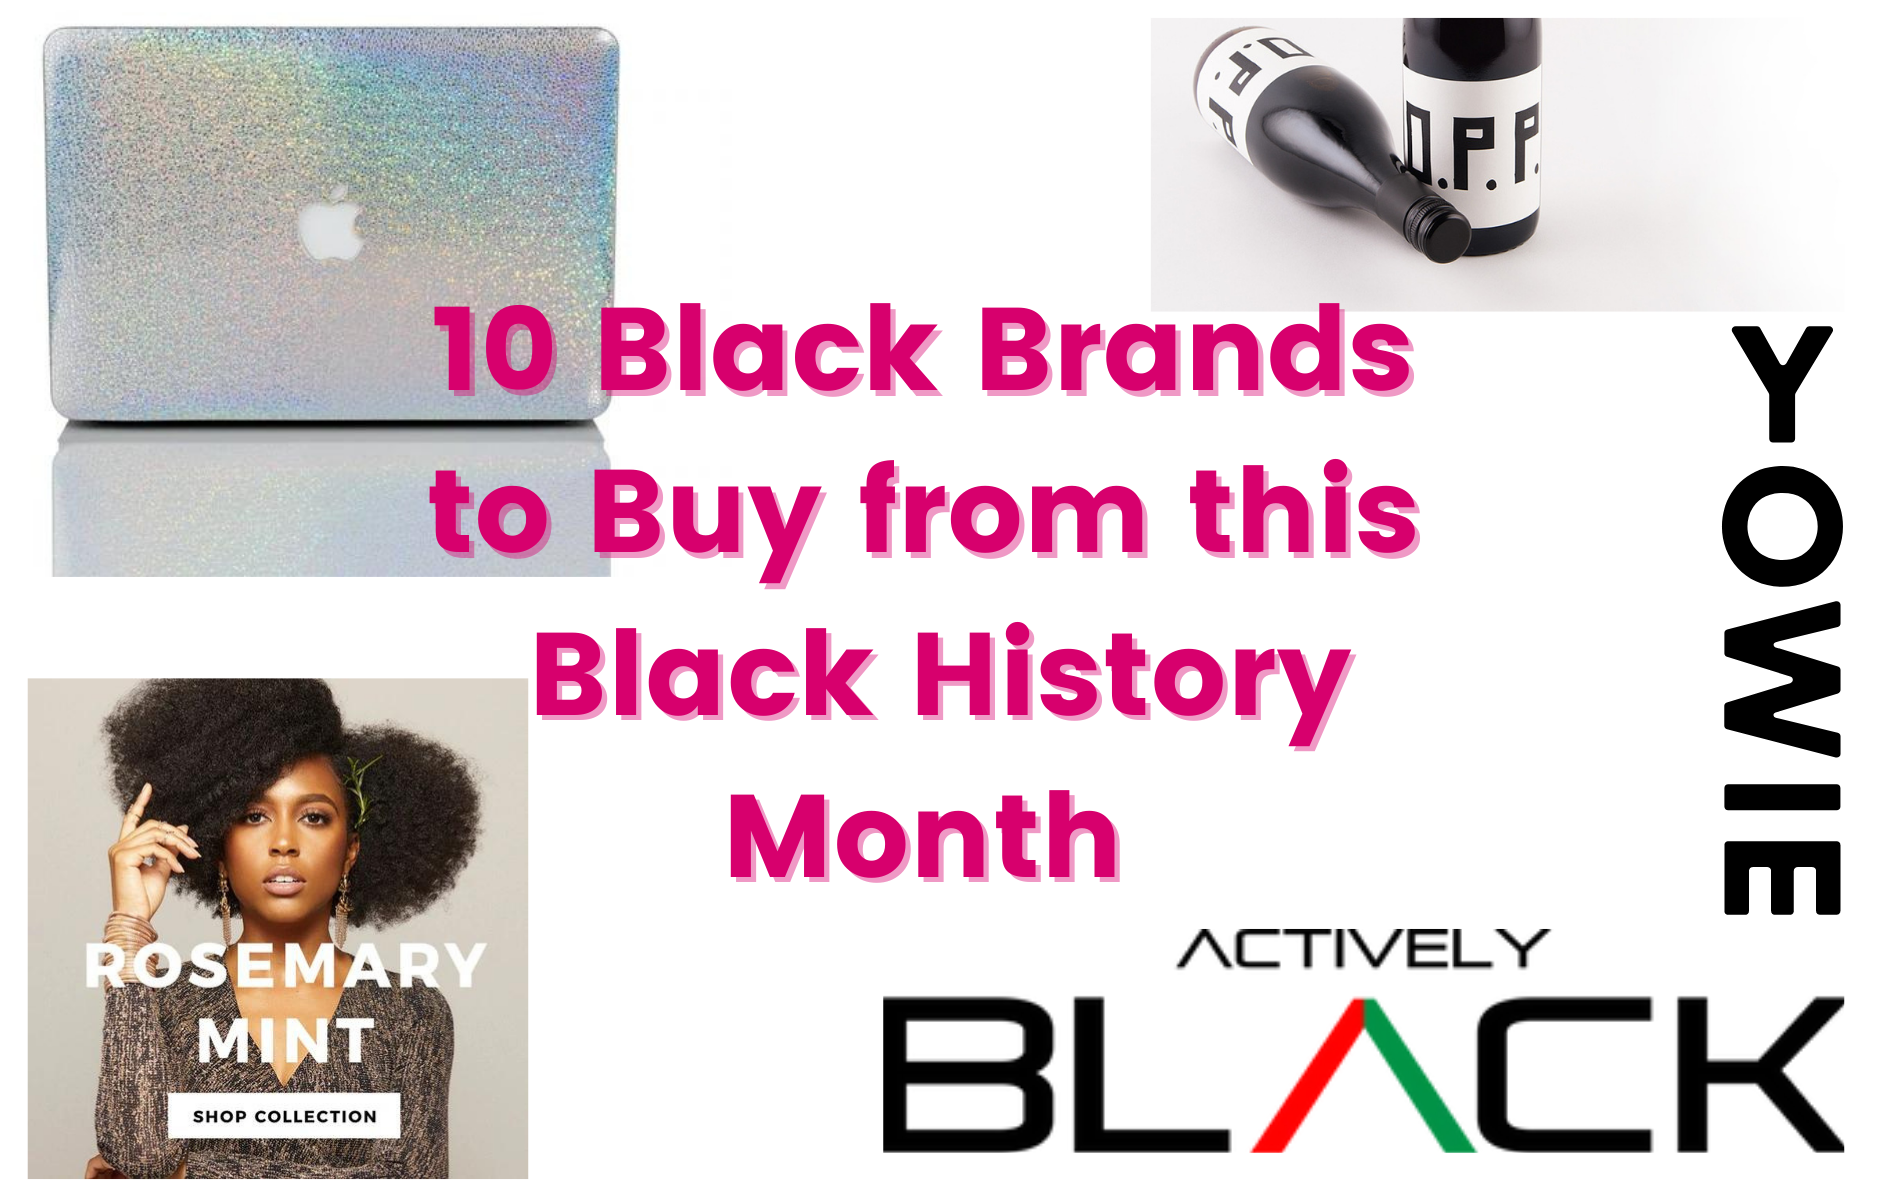 10 Top Black Brands to Buy from this Black History Month